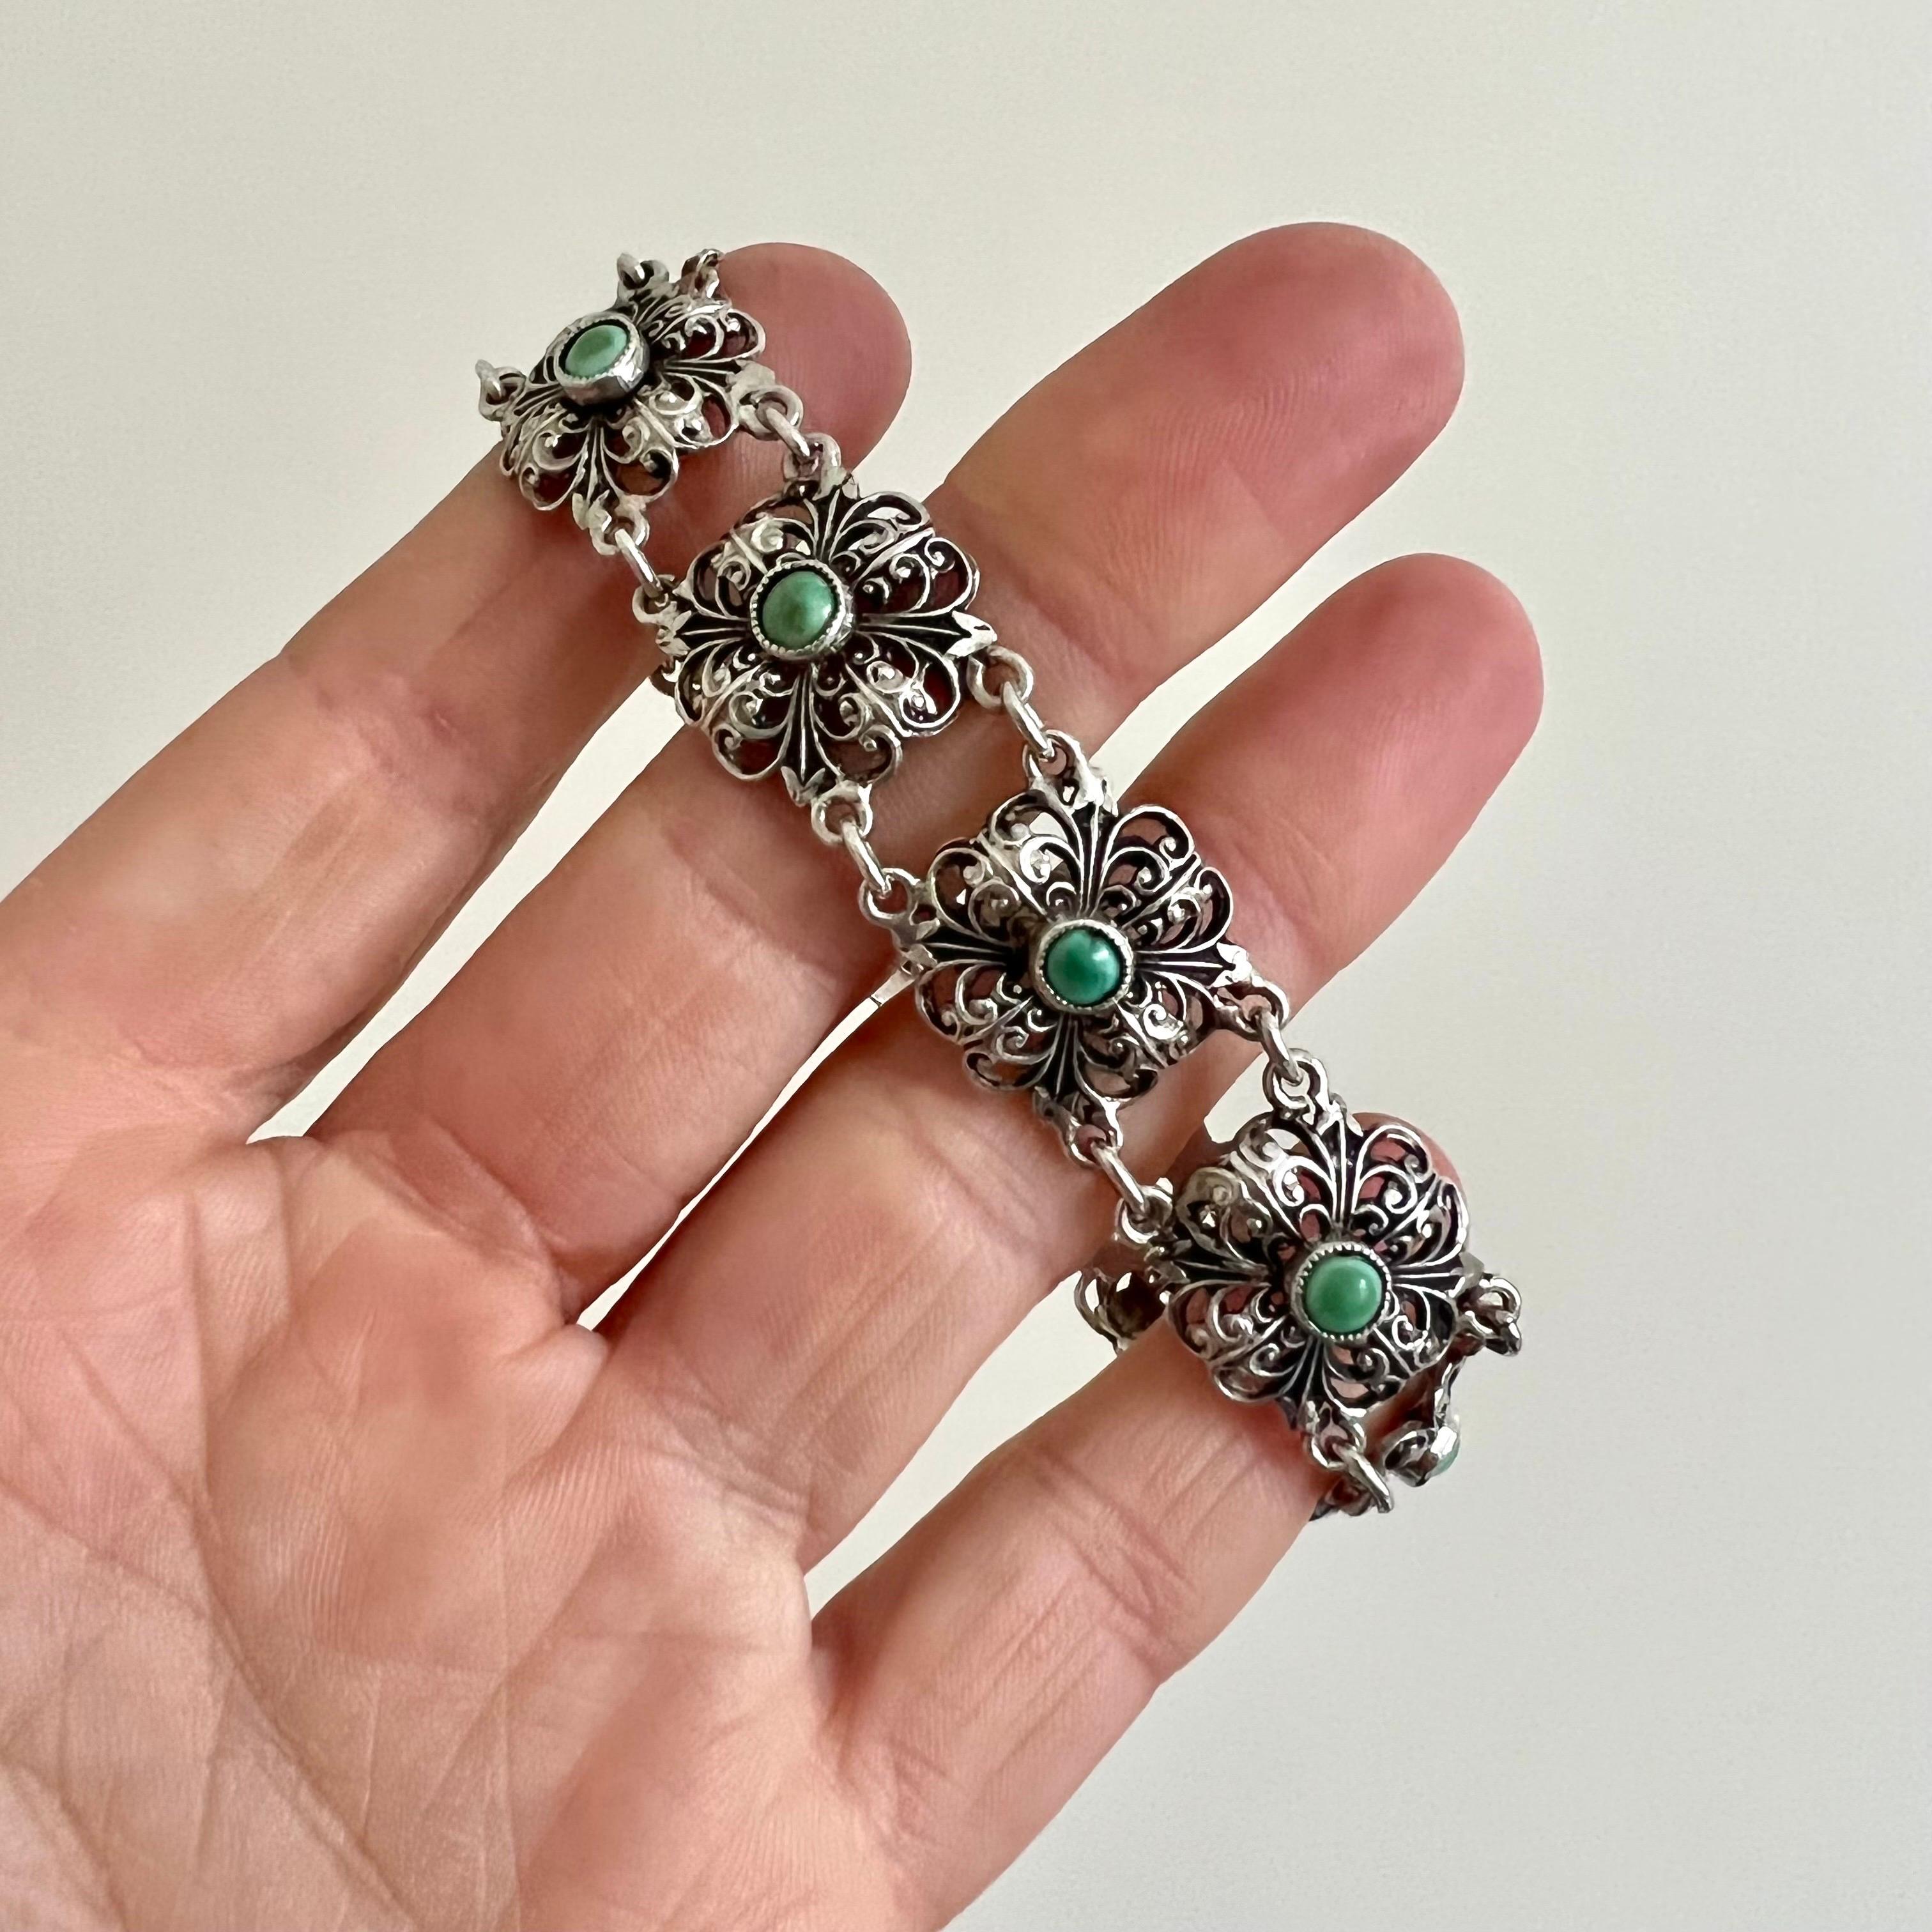 A beautiful antique Early 20th Century silver openwork link bracelet set with nine green turquoise stones. The bracelet is made of nine dainty silver floral compartments, each link is set with a round green turquoise stone in the center. These